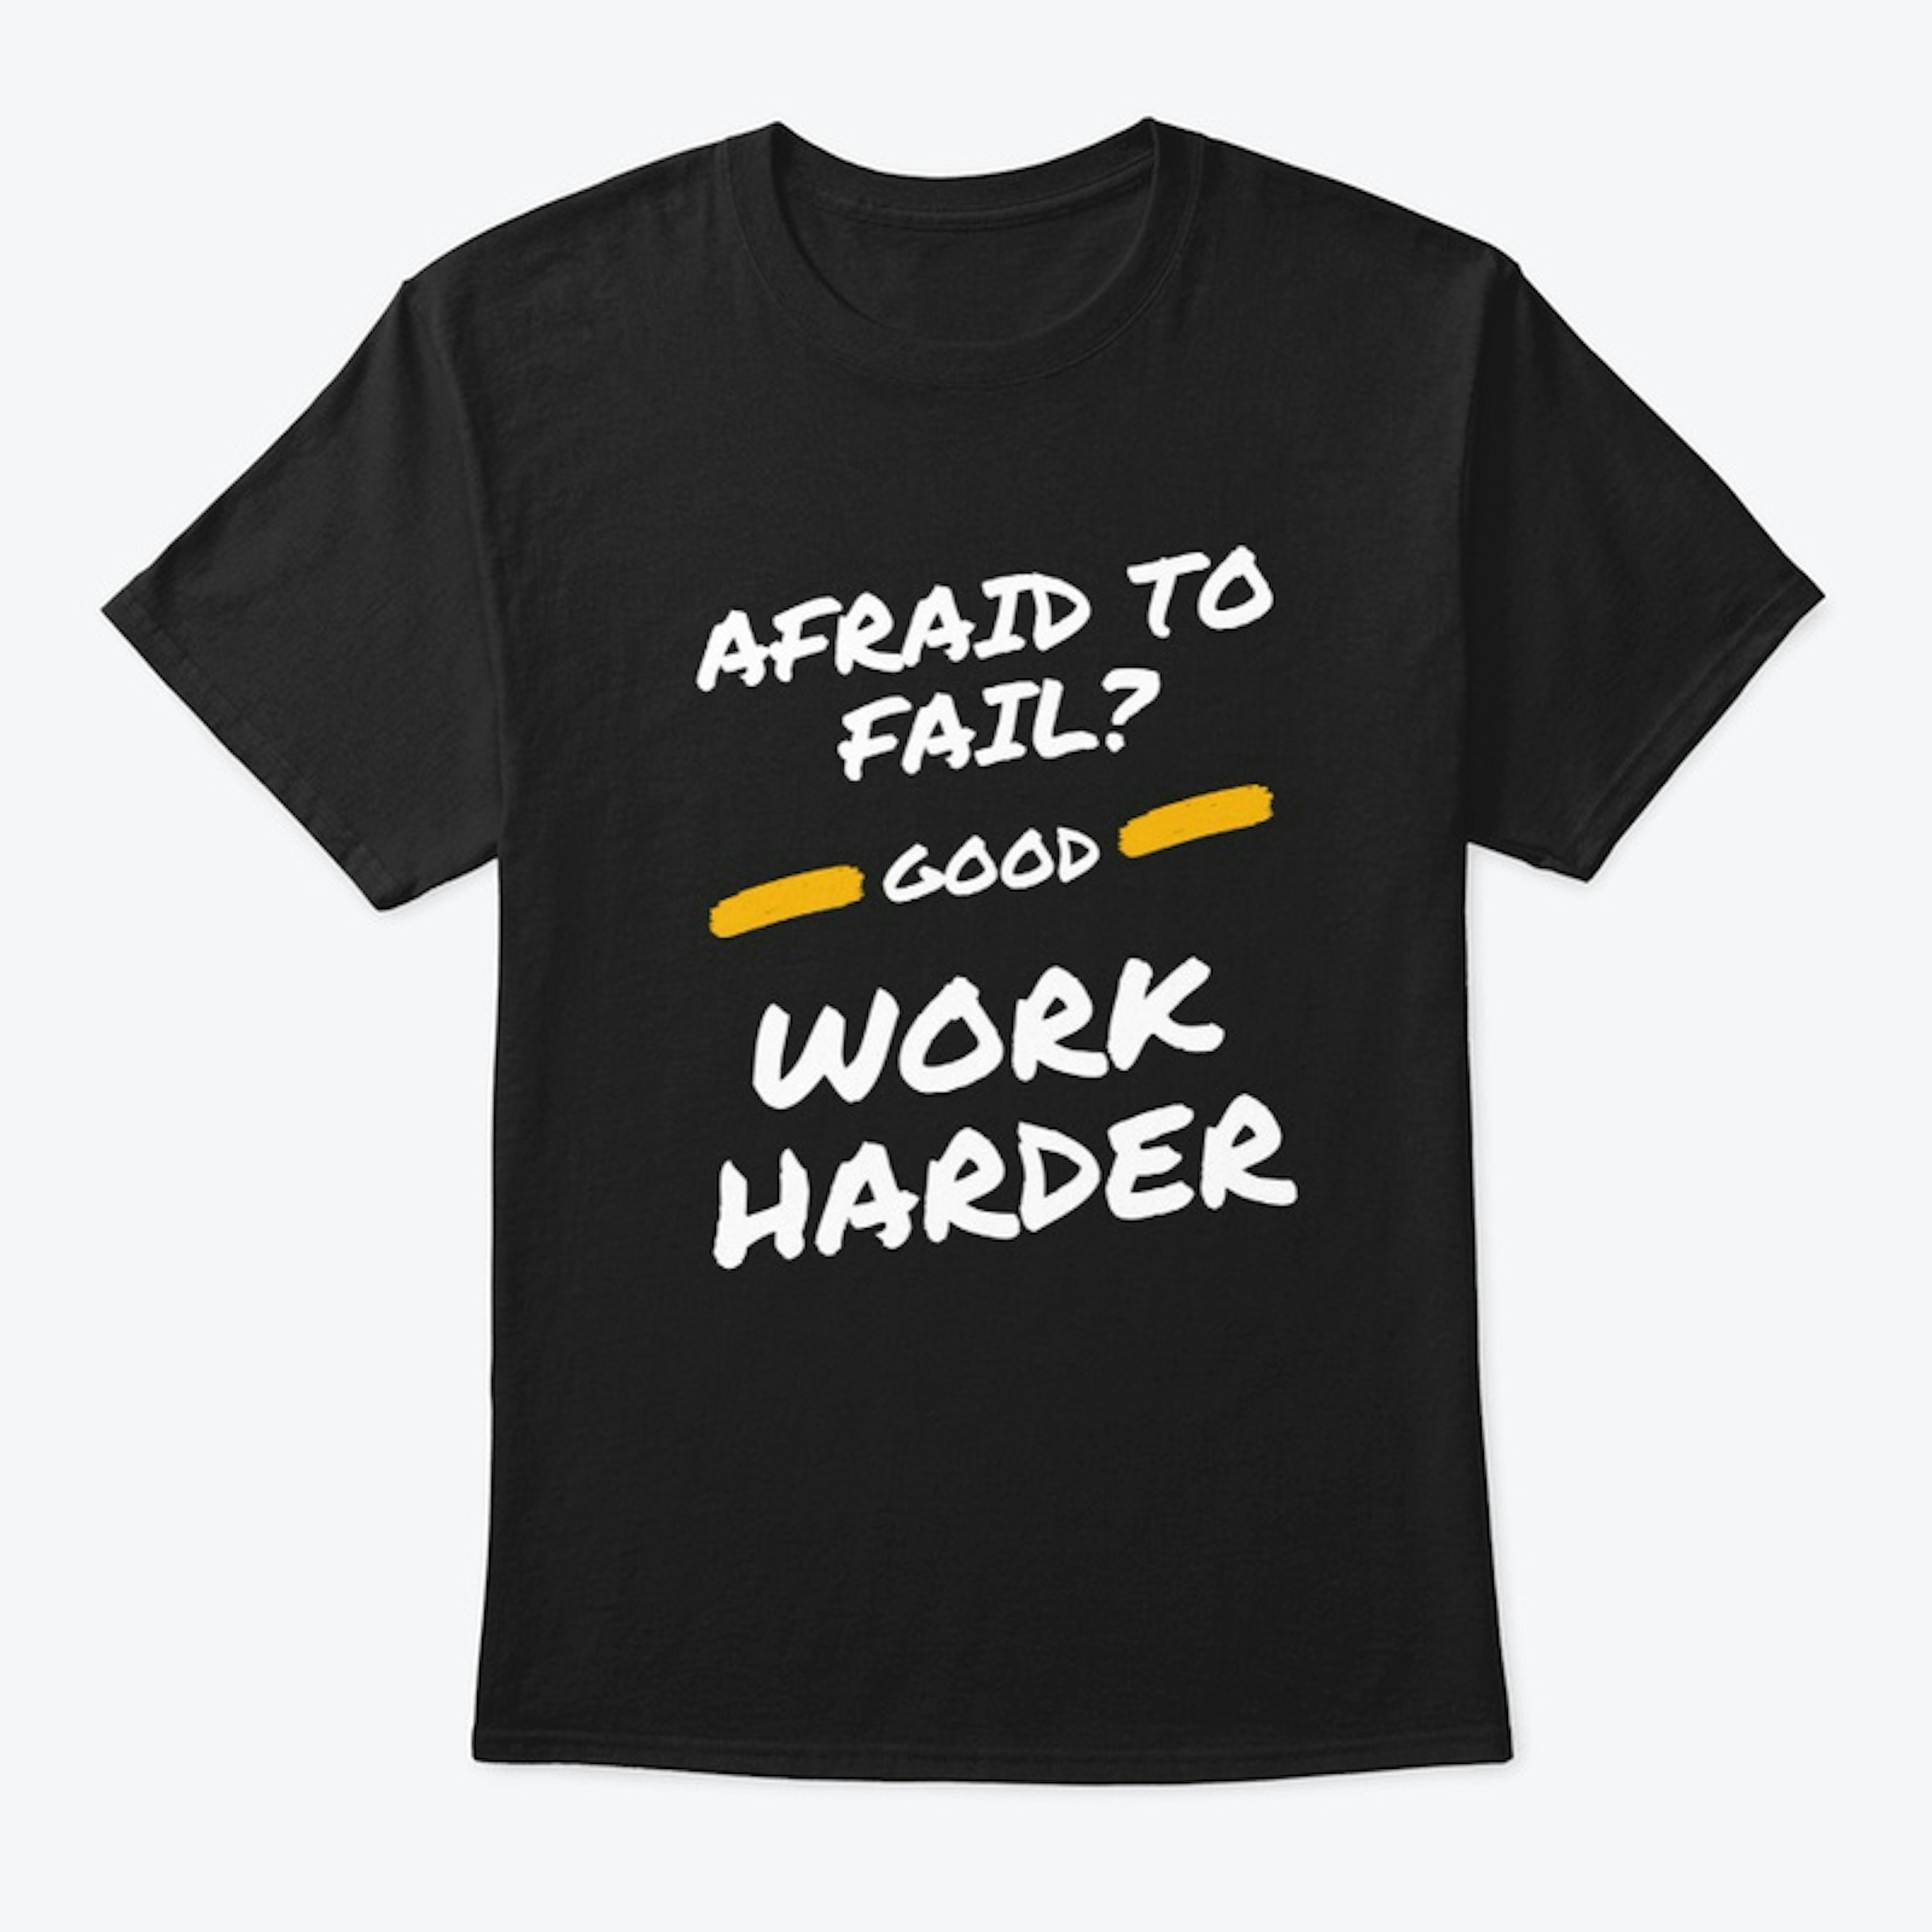 Work harder than before T shirt